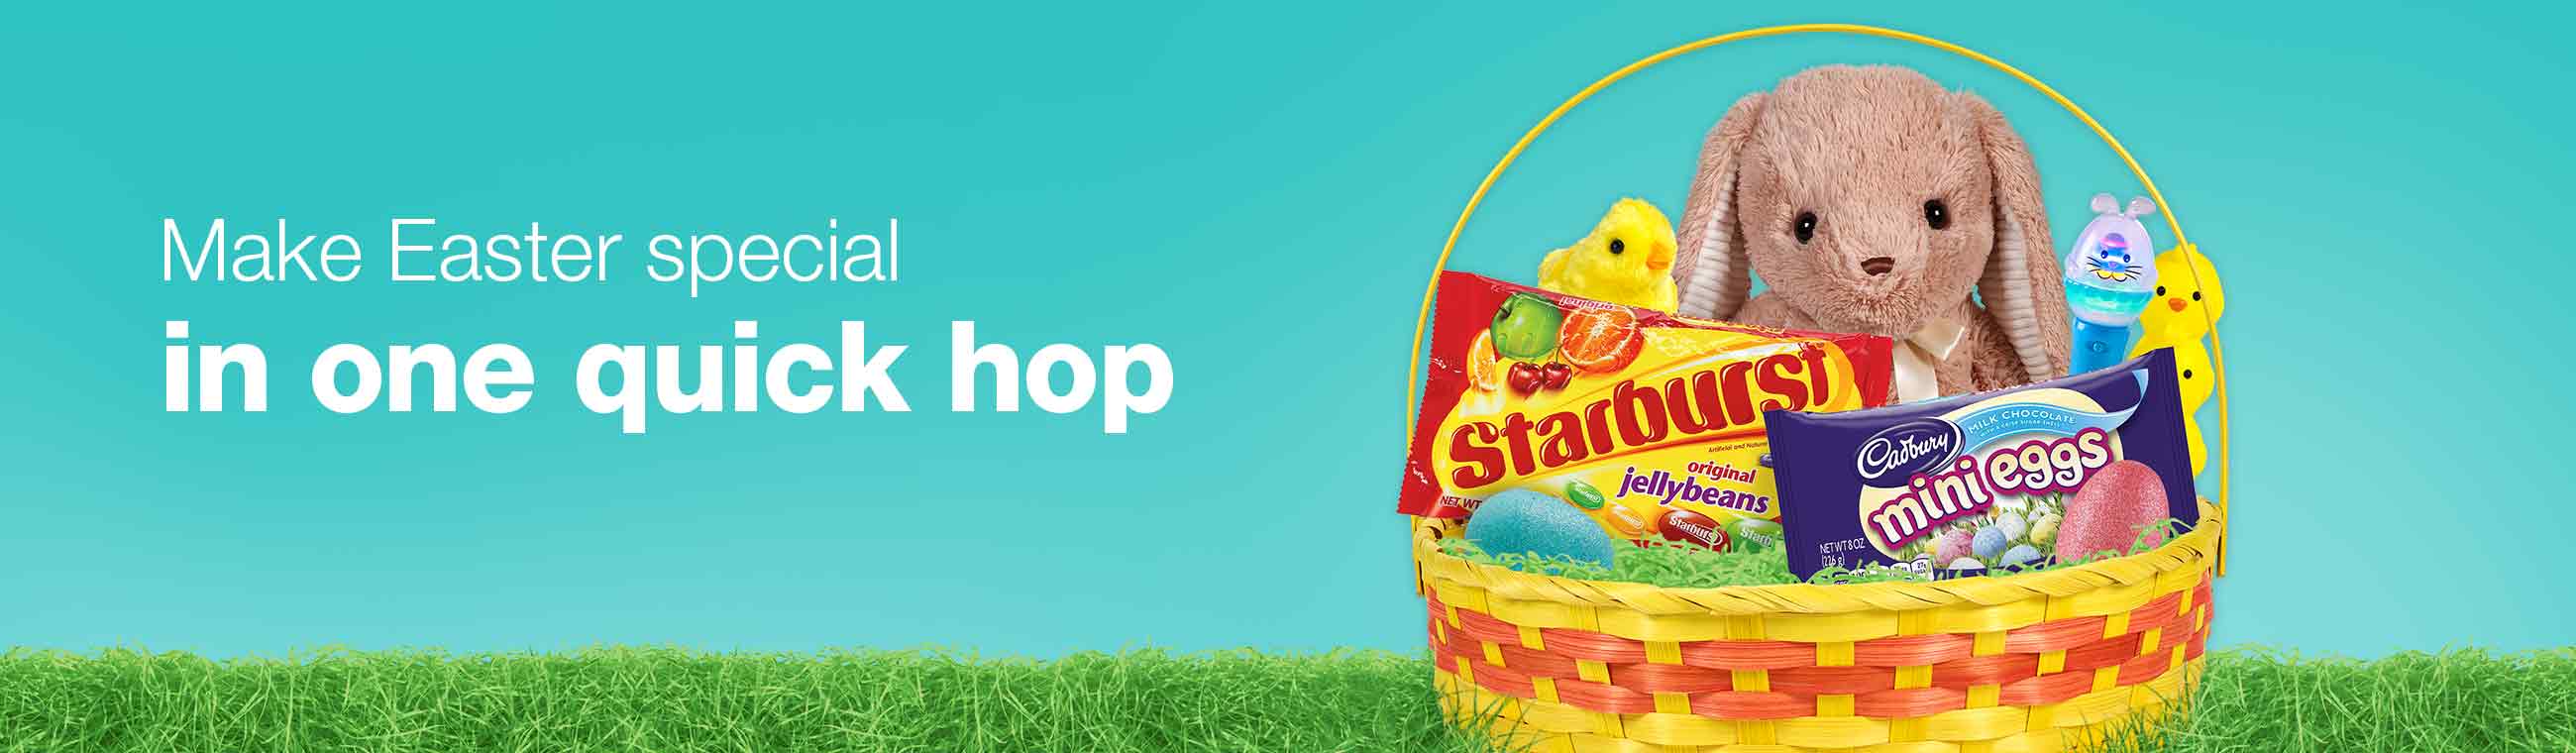 Make Easter special in one hop.